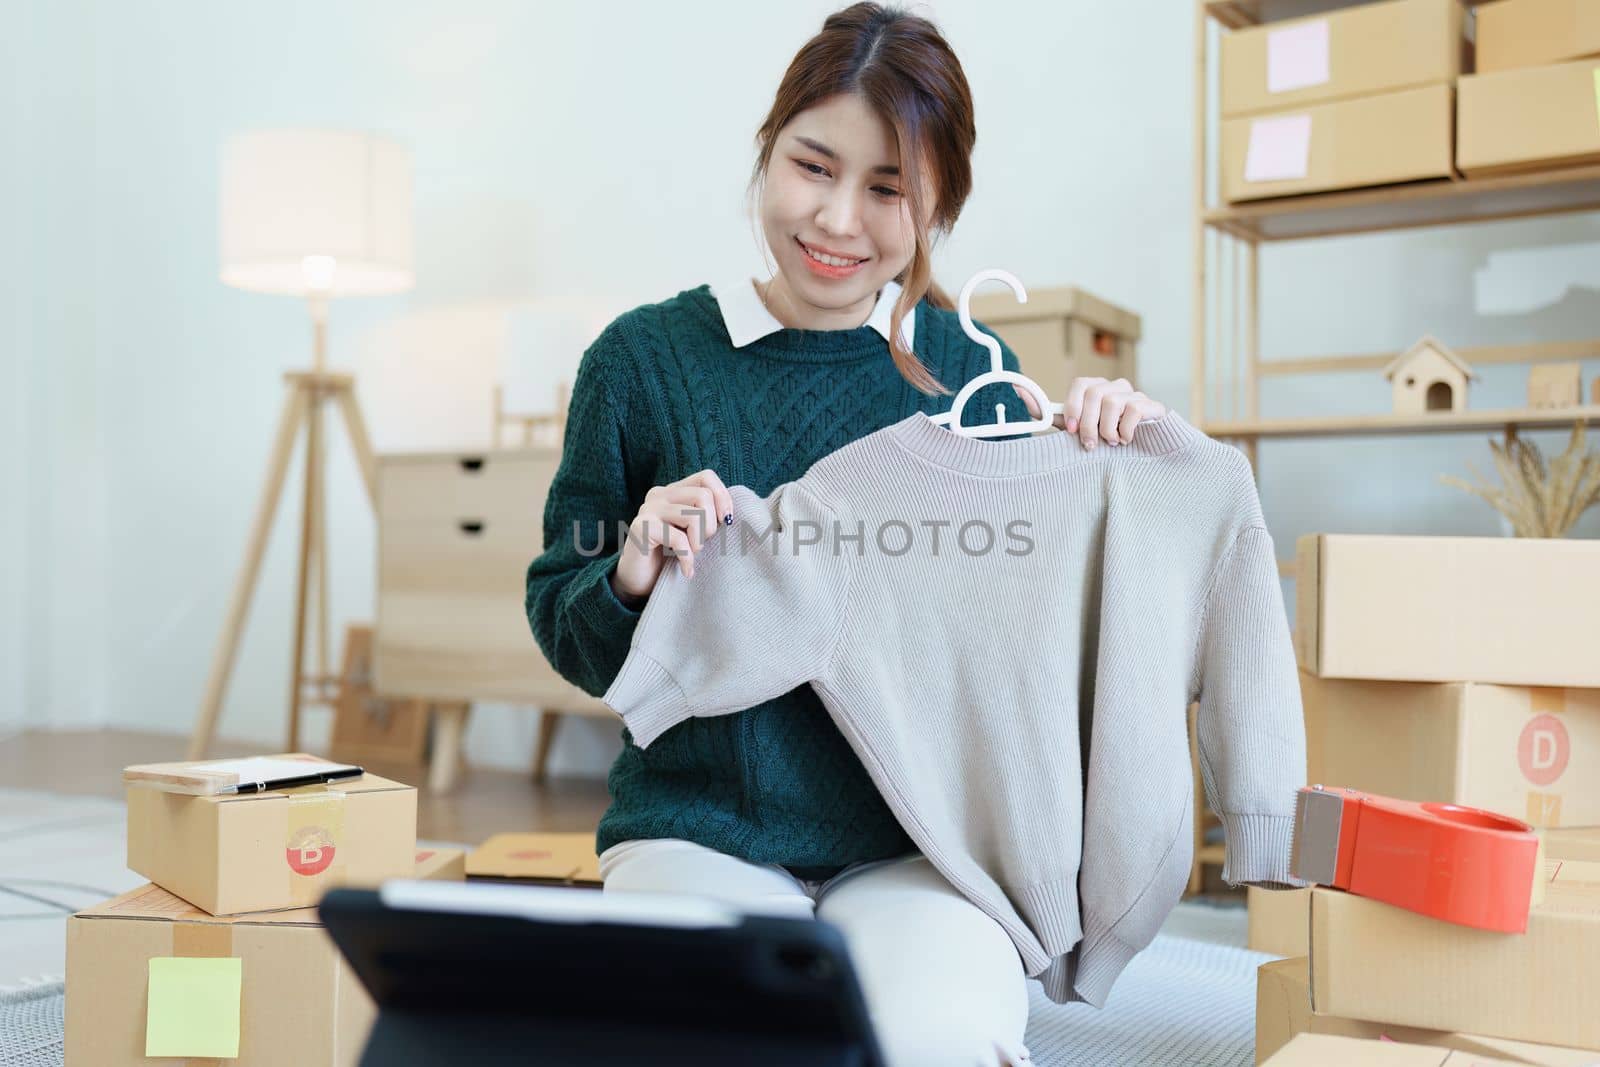 Starting small business entrepreneur of independent young Asian woman online seller using a tablet computer showing products to a customer before making a purchase decision. SME delivery concept by Manastrong